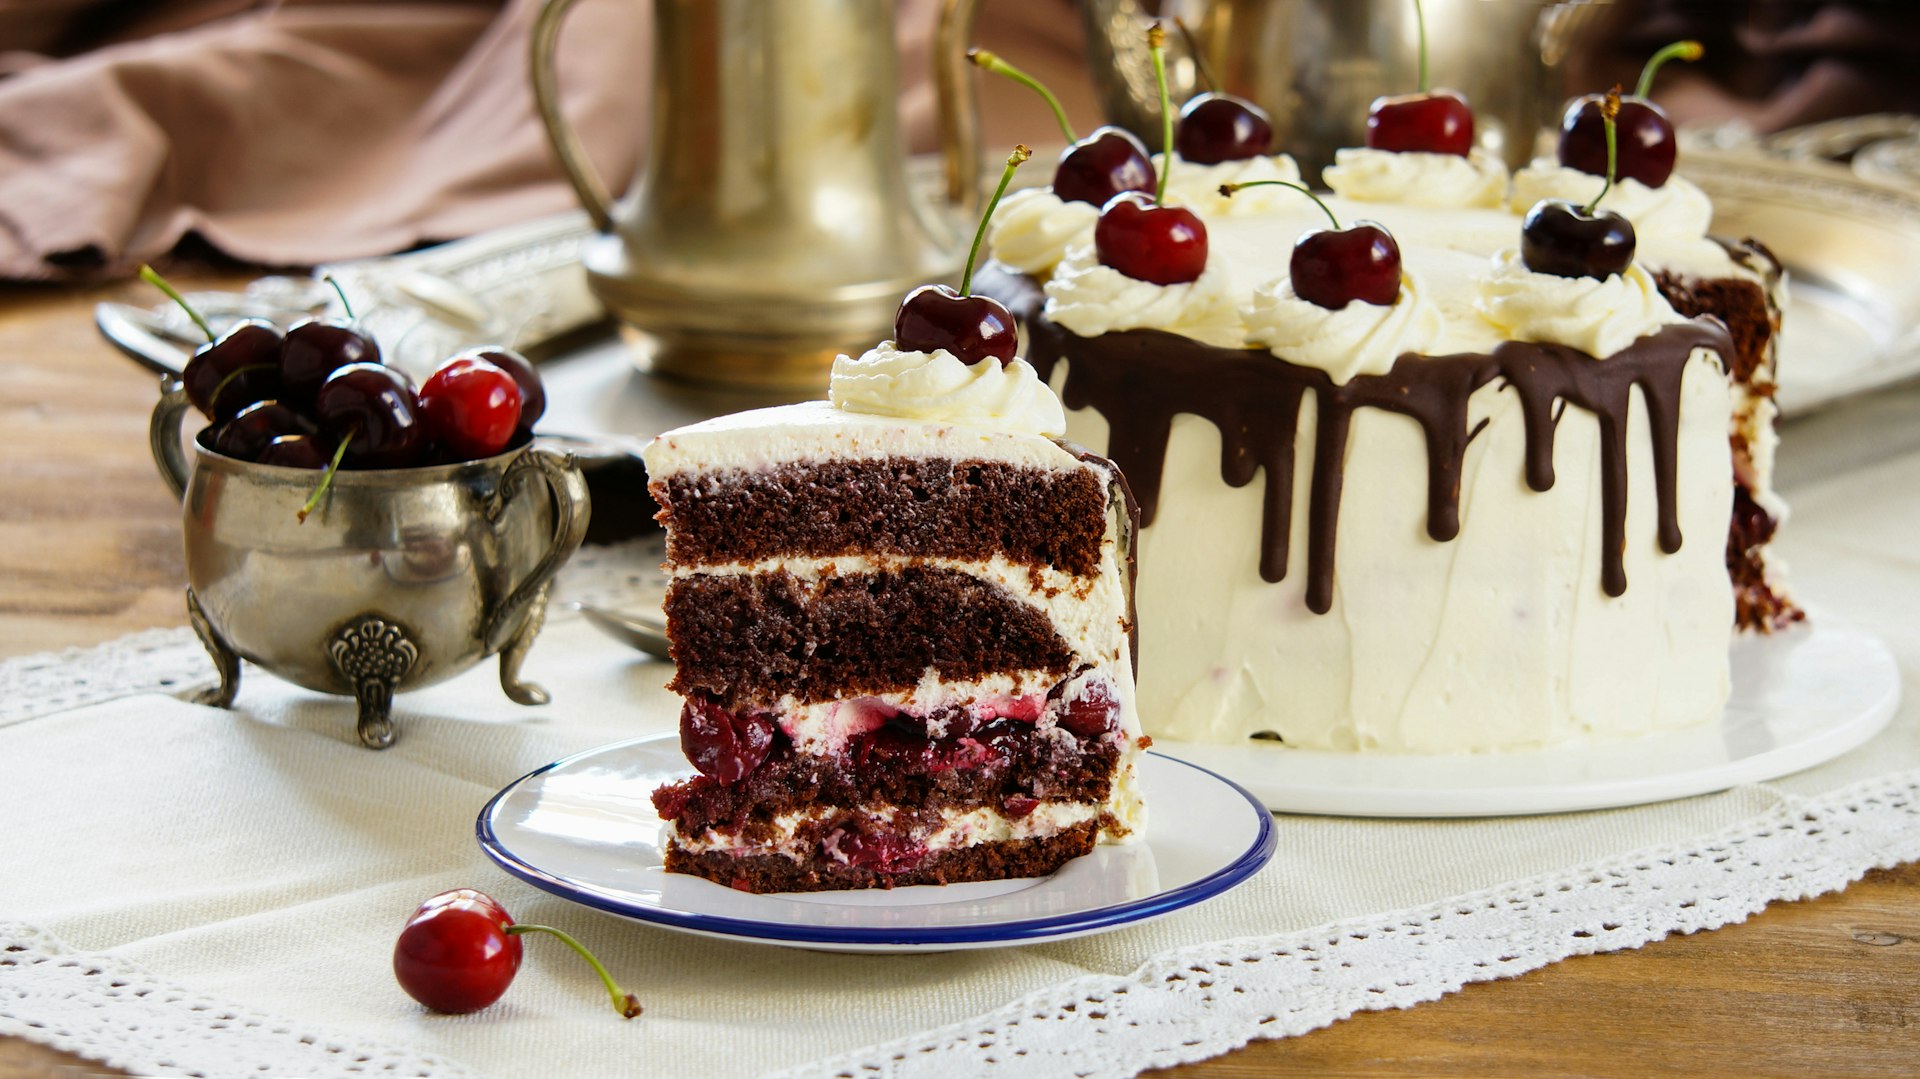 A cake with layers of chocolate sponge, cream, cherries, more chocolate and more cream